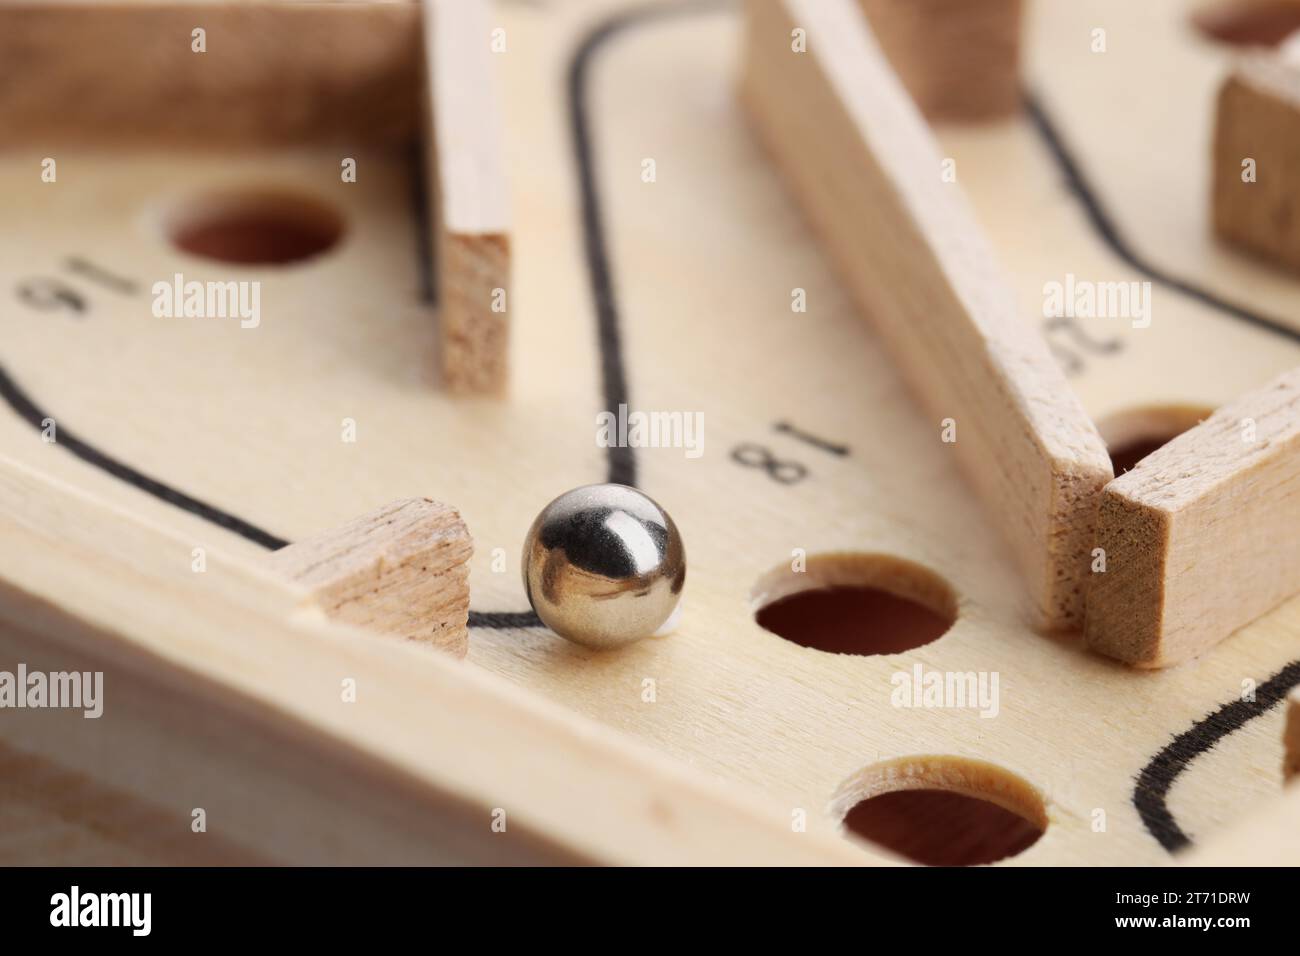 Wooden toy maze with metal ball, closeup Stock Photo